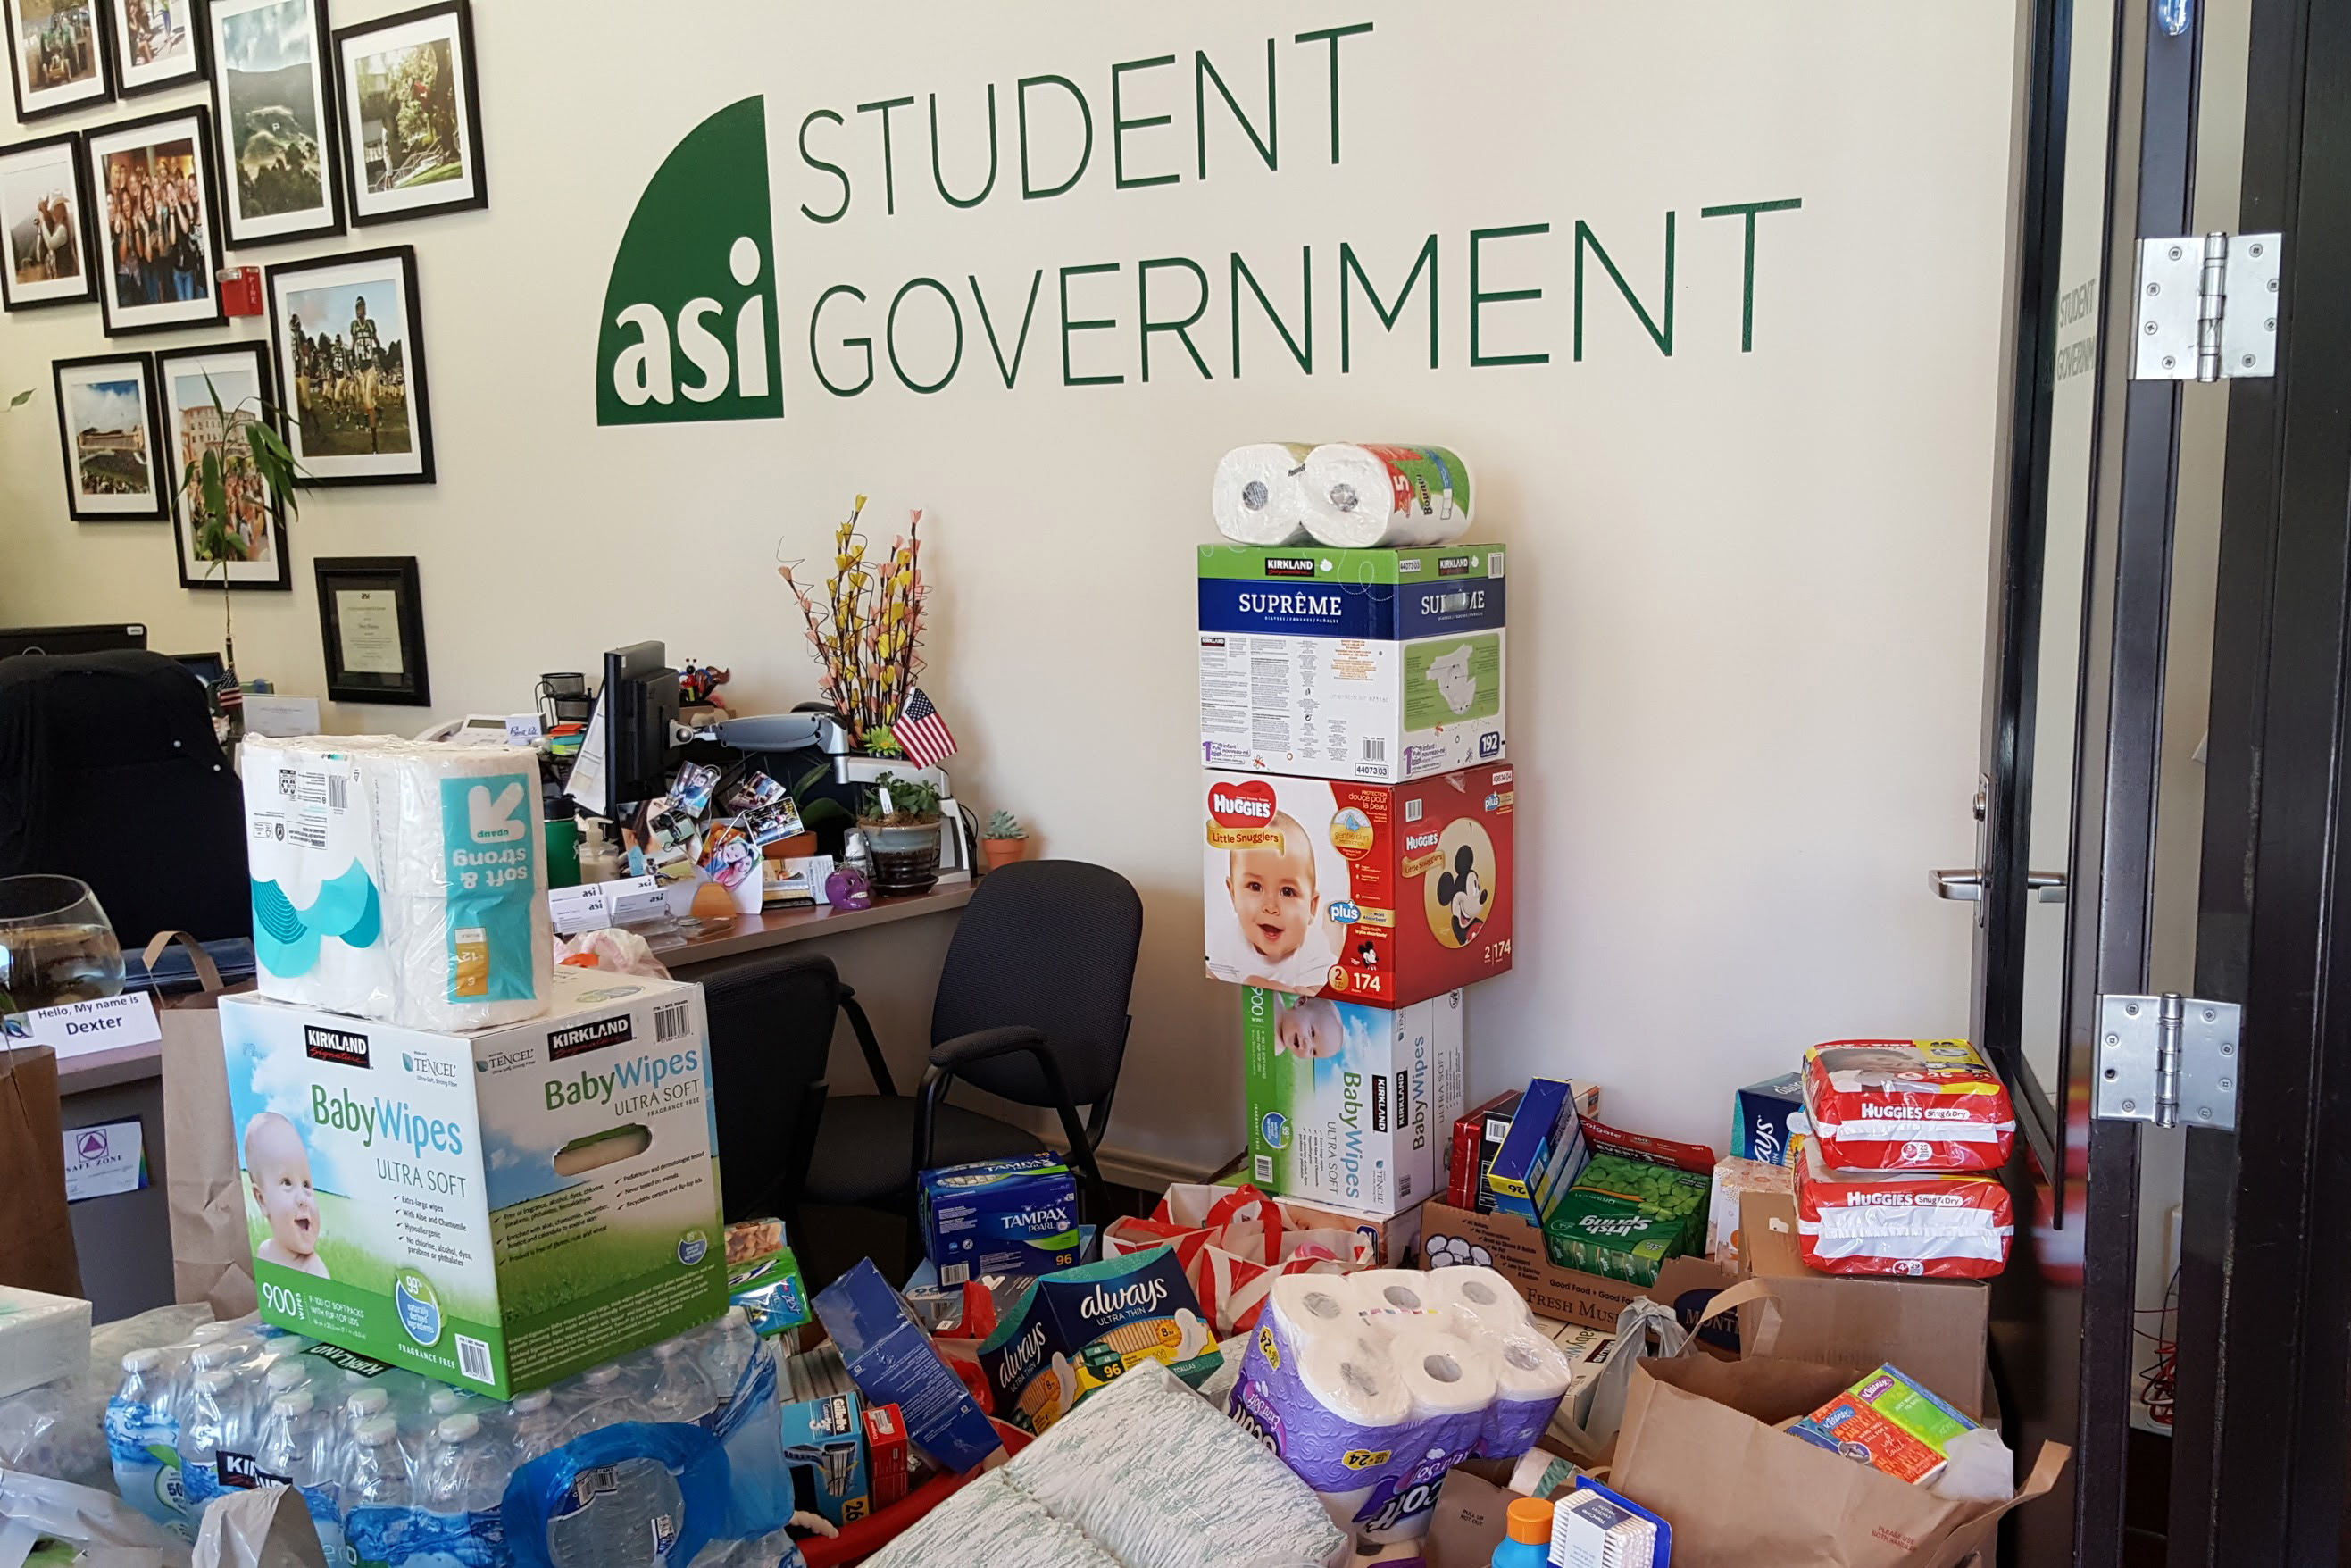 Items including water bottles, paper towels, and diapers are piled up in front of the ASI Student Government office